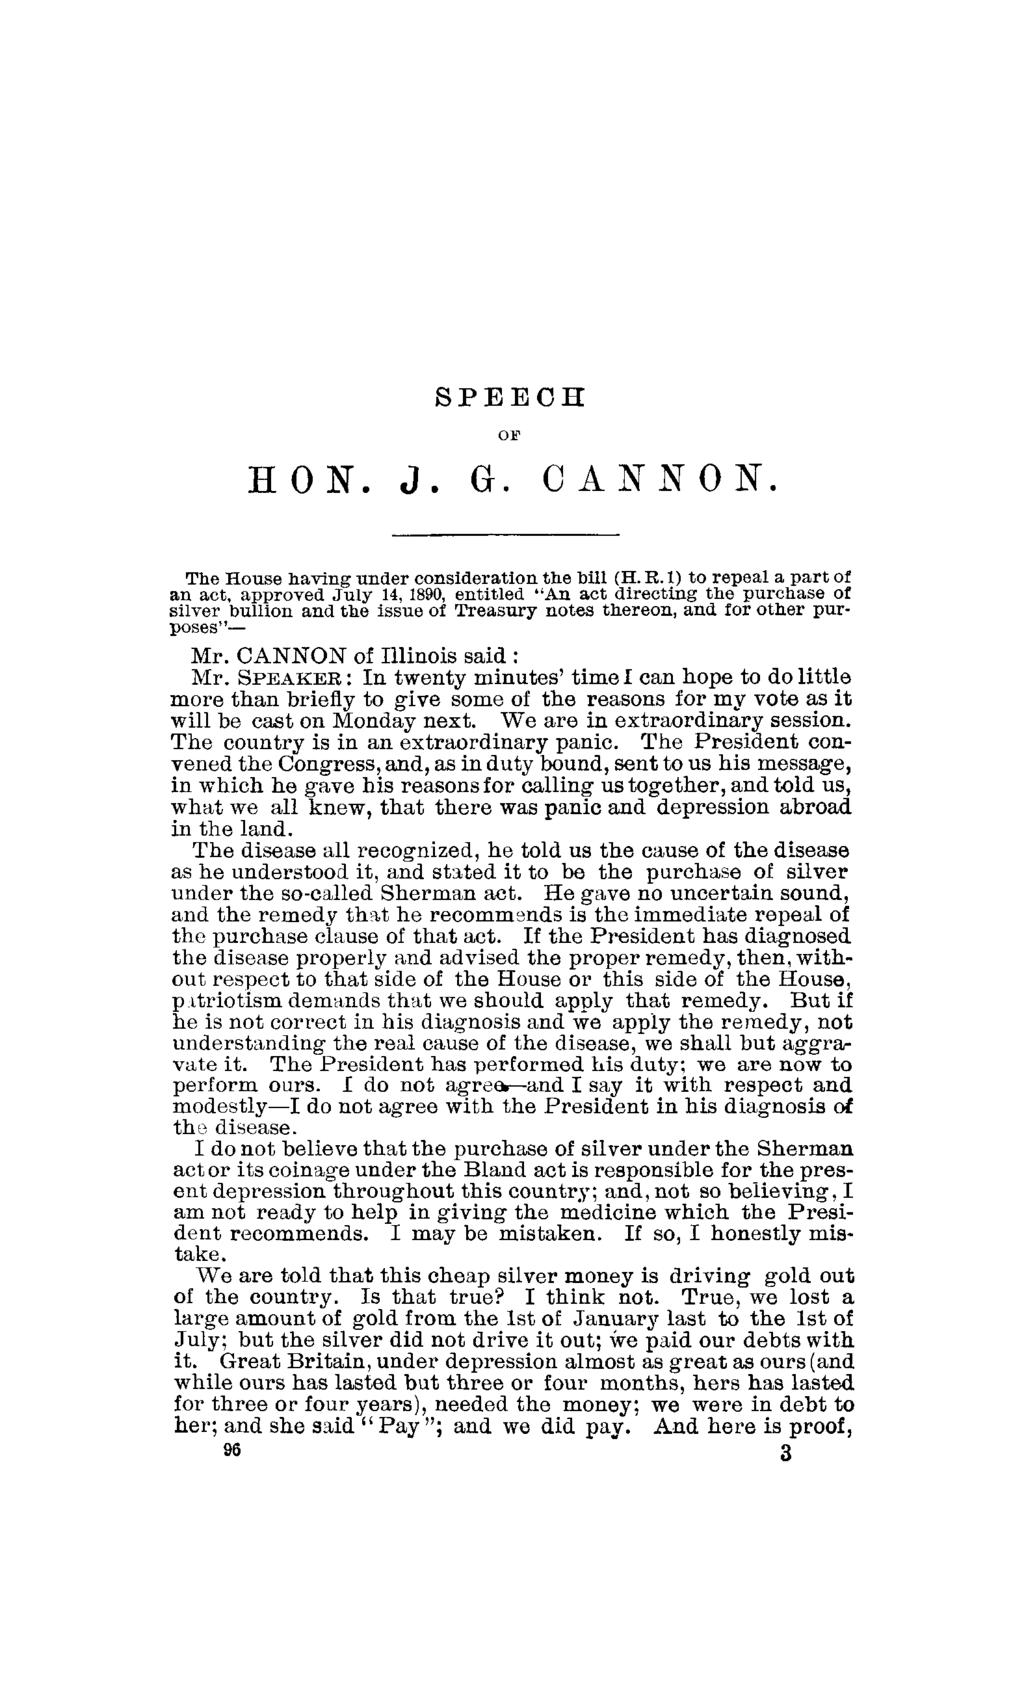 SPEECH OF HON. J. G. CANNON. The House having under consideration the bill (H. R.